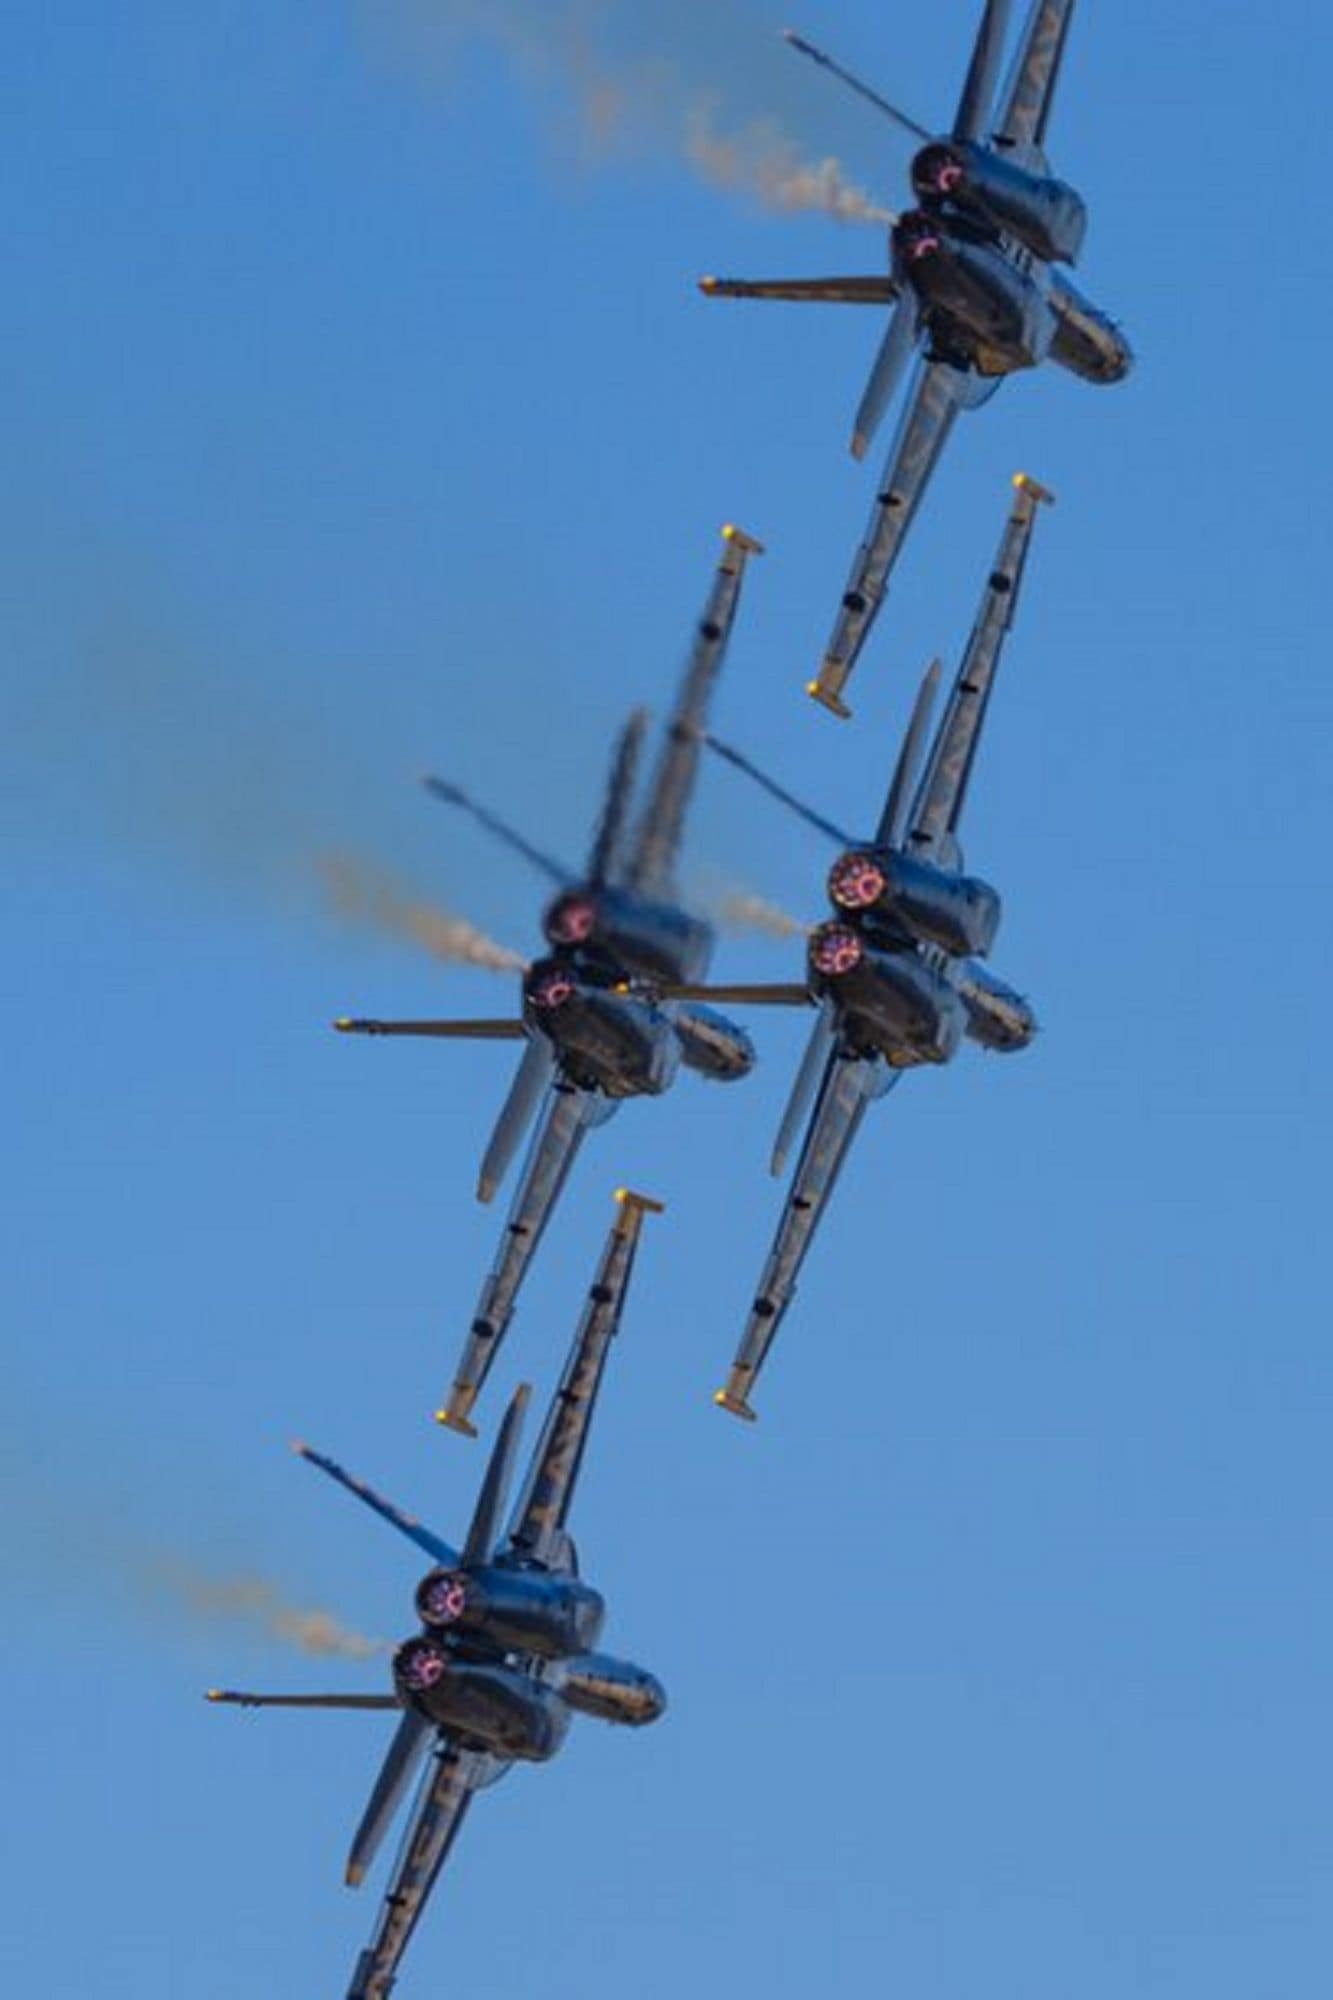 Four Blue Angel F-18 Hornets flying away for air show center in tight formation. (Photo: Bastien Melin via @ocular.photo on Instagram)